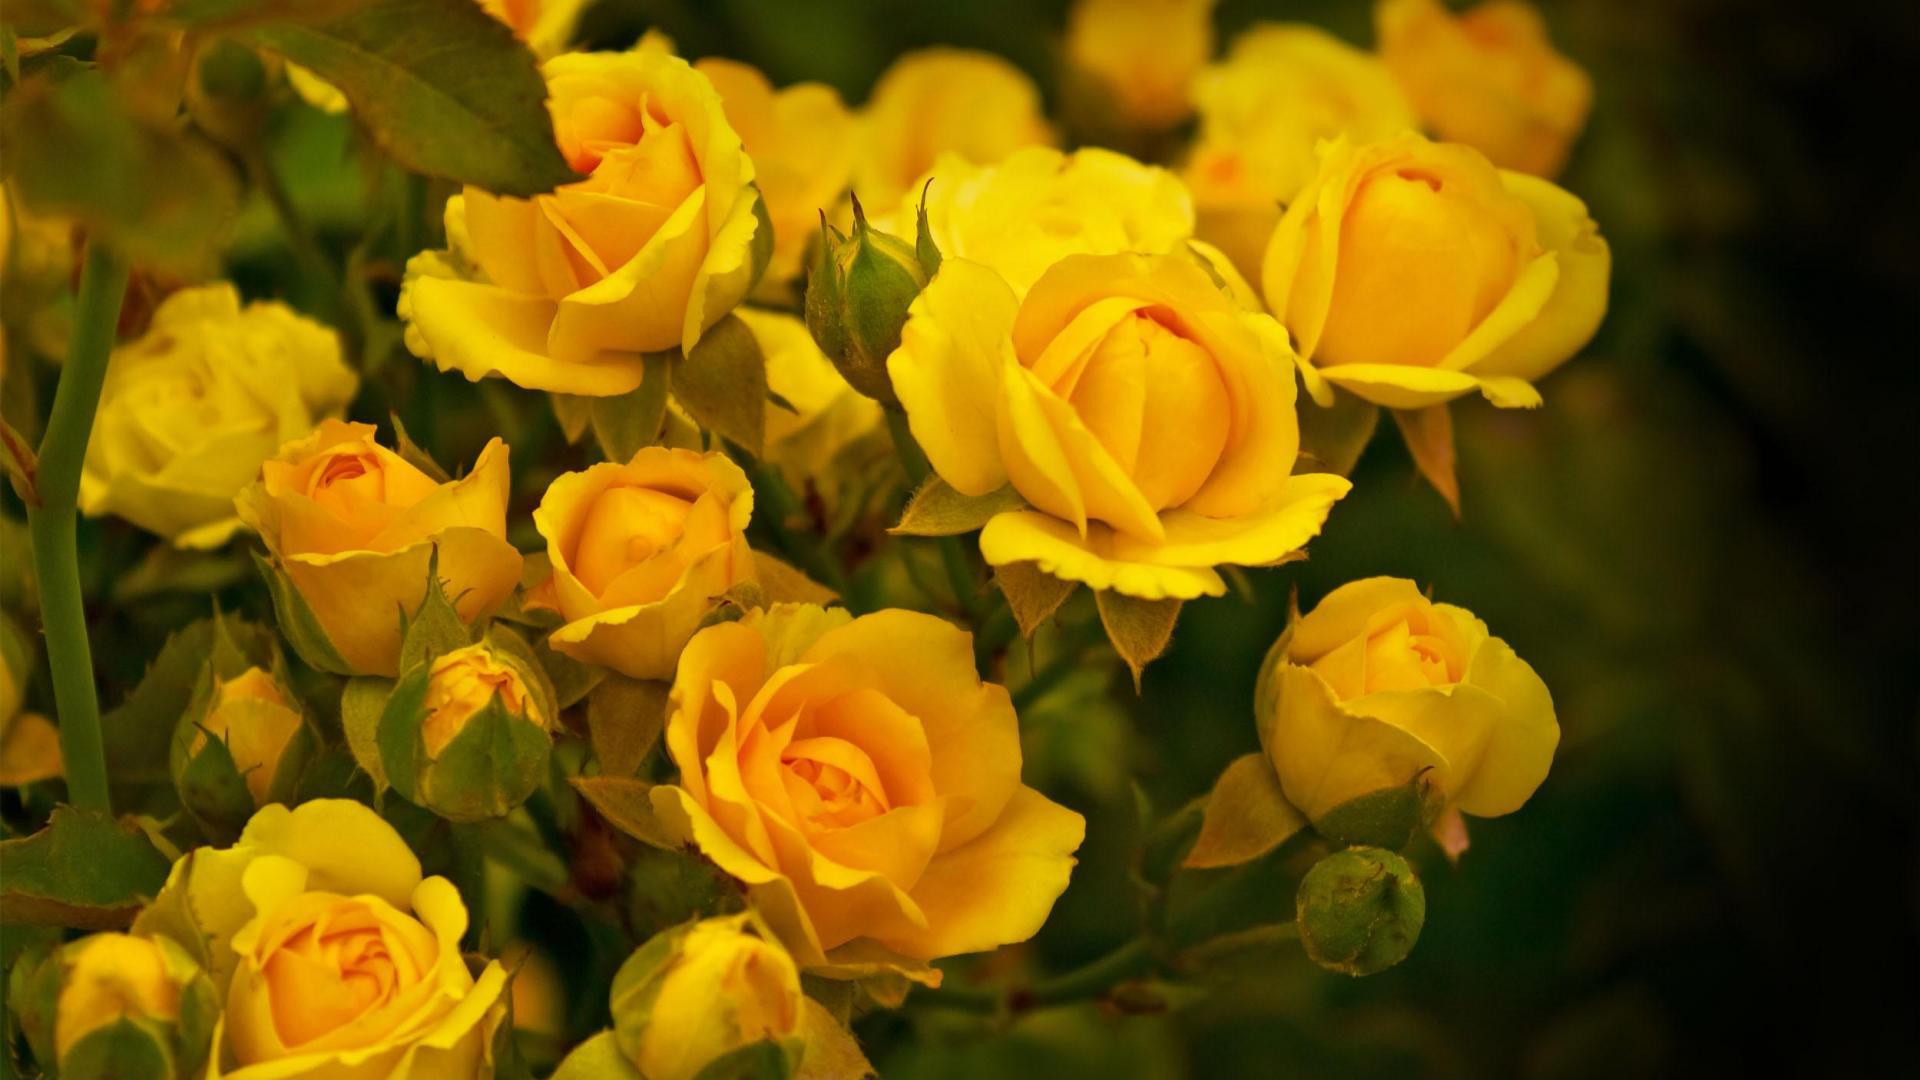 Beautiful yellow roses in the garden wallpaper and image